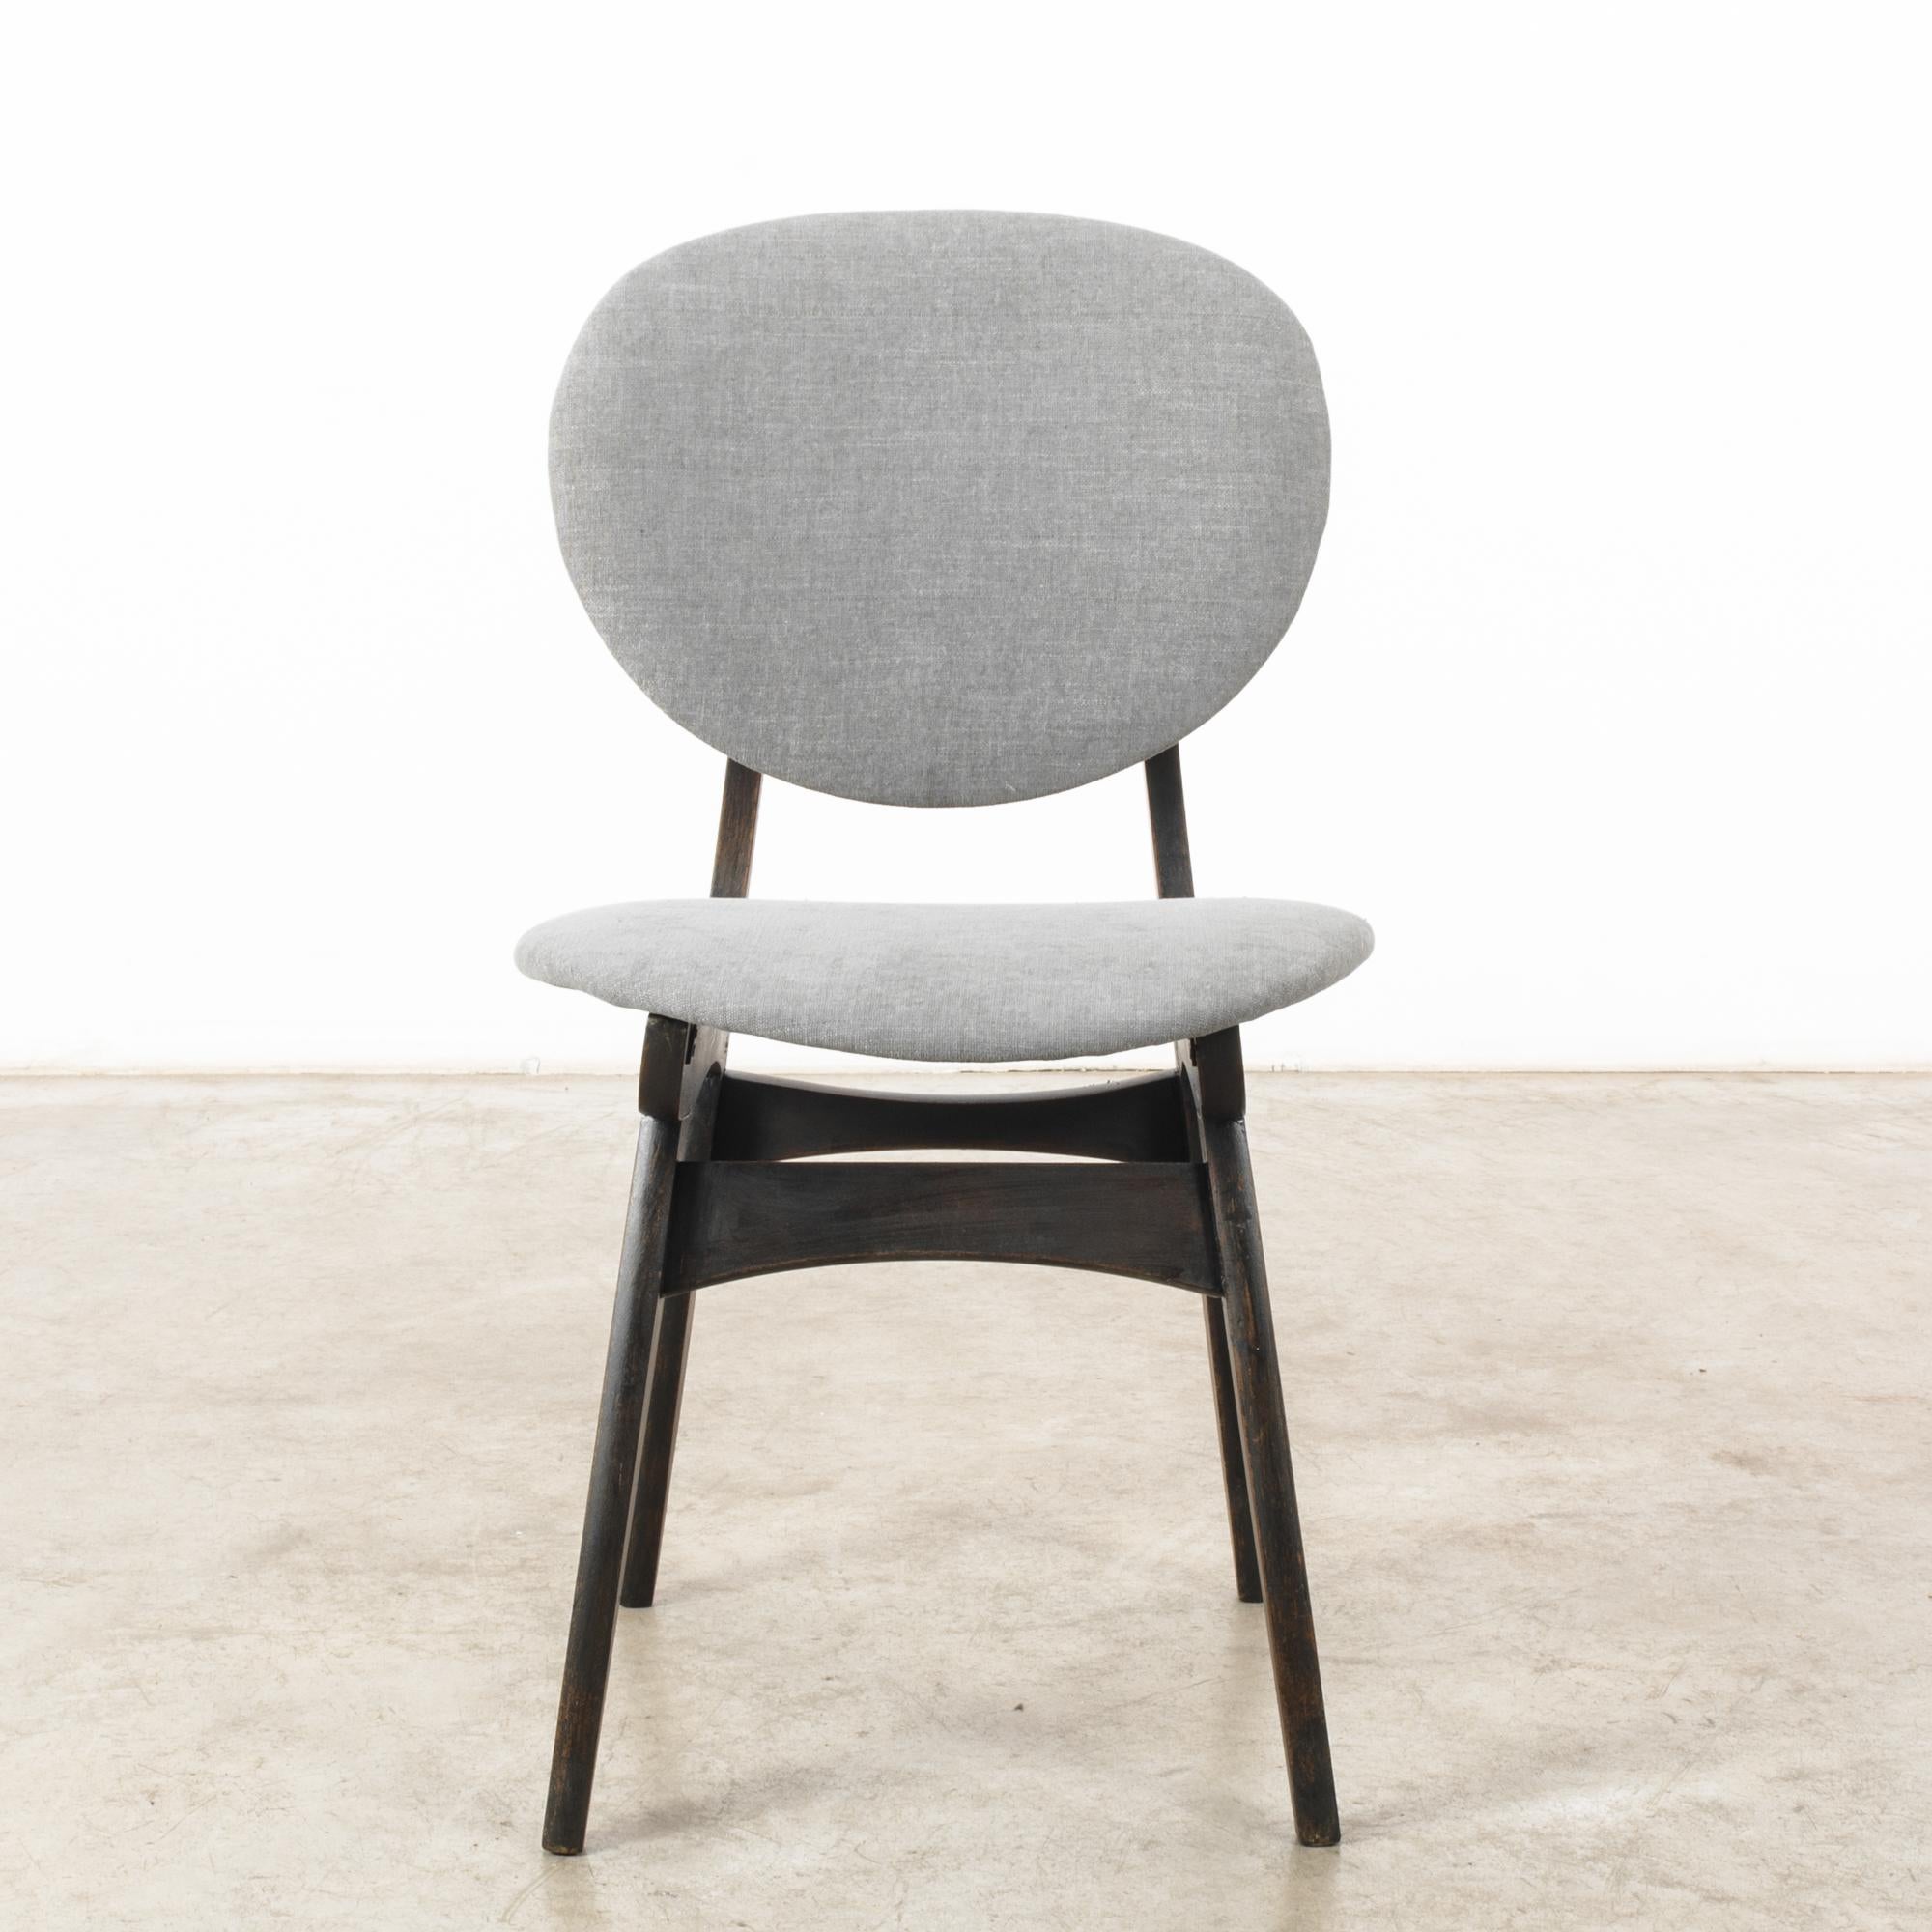 In the innovative design landscape of 1960s Denmark, this wooden chair with an upholstered seat and back epitomizes the sleek sophistication and ergonomic comfort of the era. Crafted with meticulous attention to detail, this piece represents the